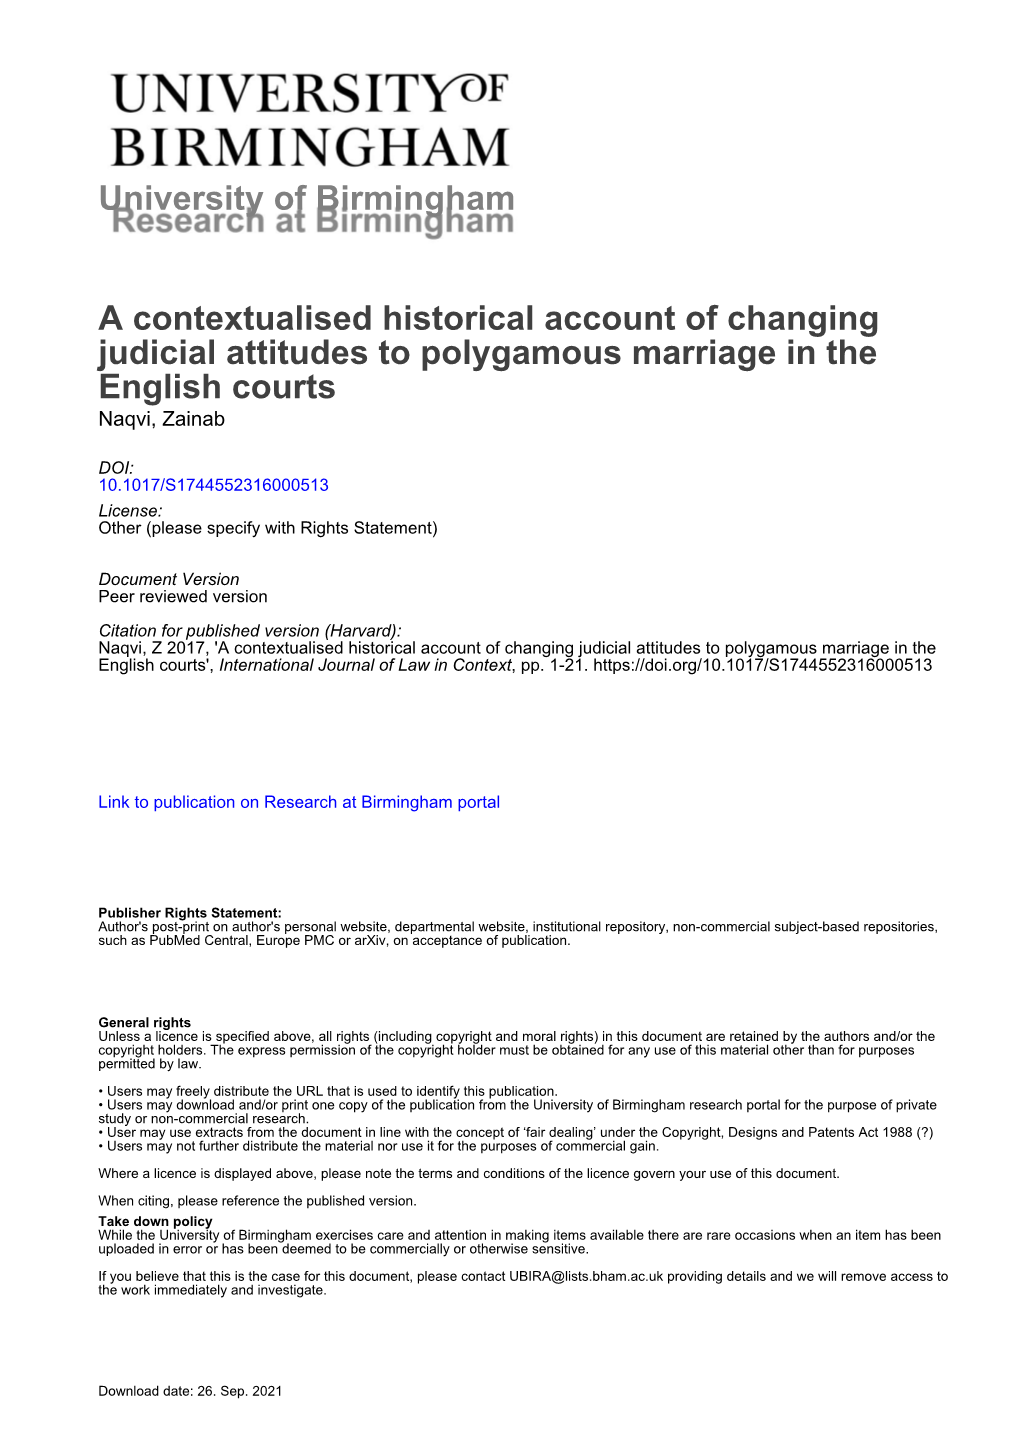 A Contextualised Historical Account of Changing Judicial Attitudes to Polygamous Marriage in the English Courts Naqvi, Zainab